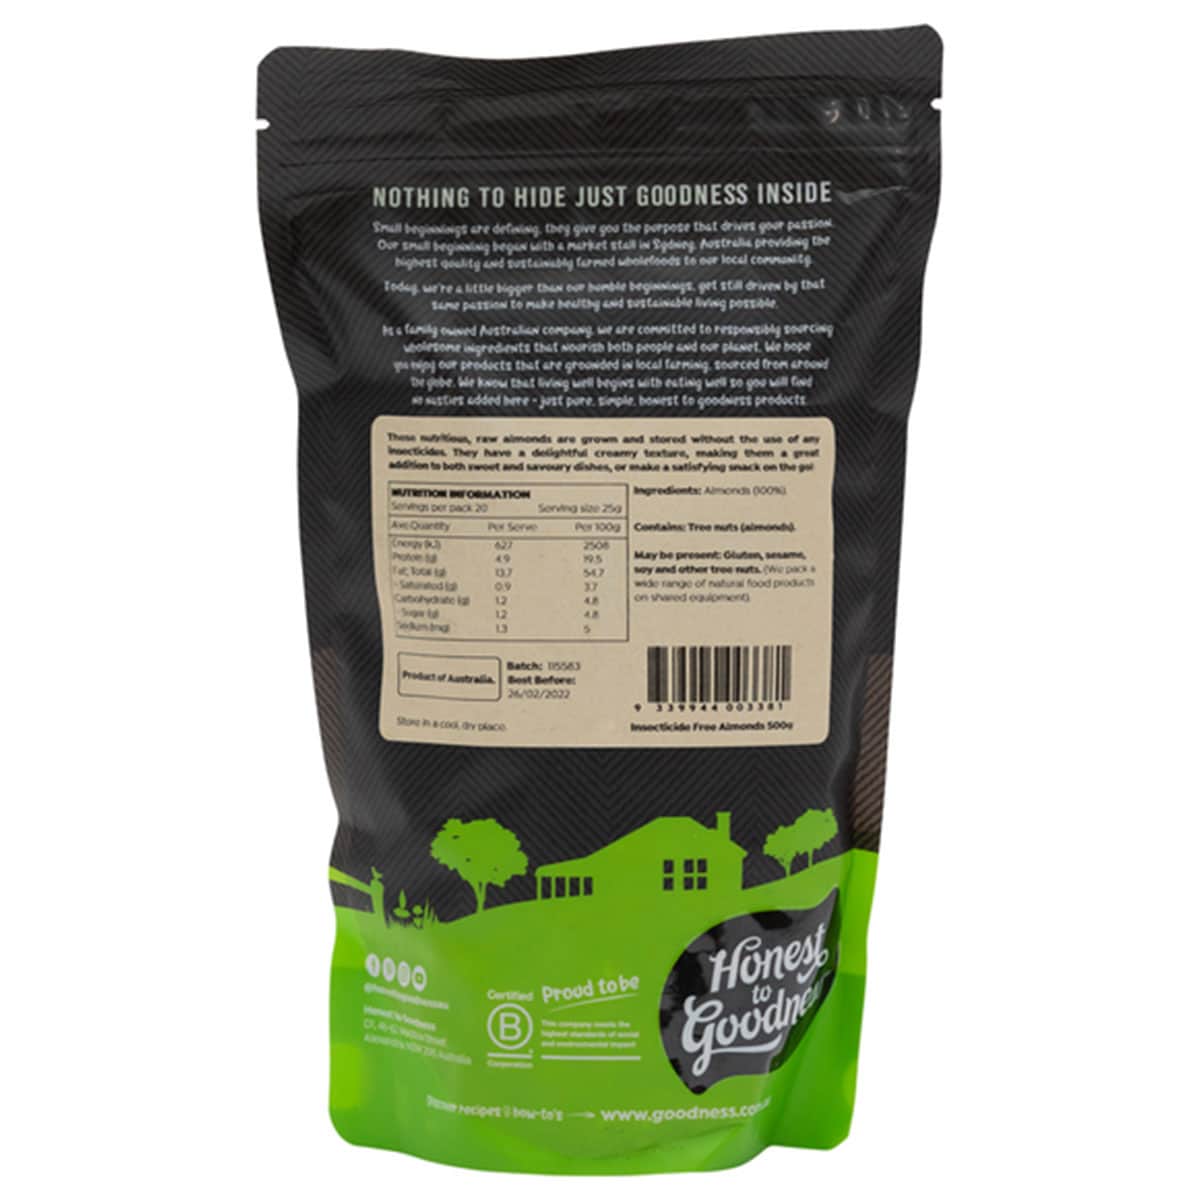 Honest to Goodness Insecticide Free Almonds 500g